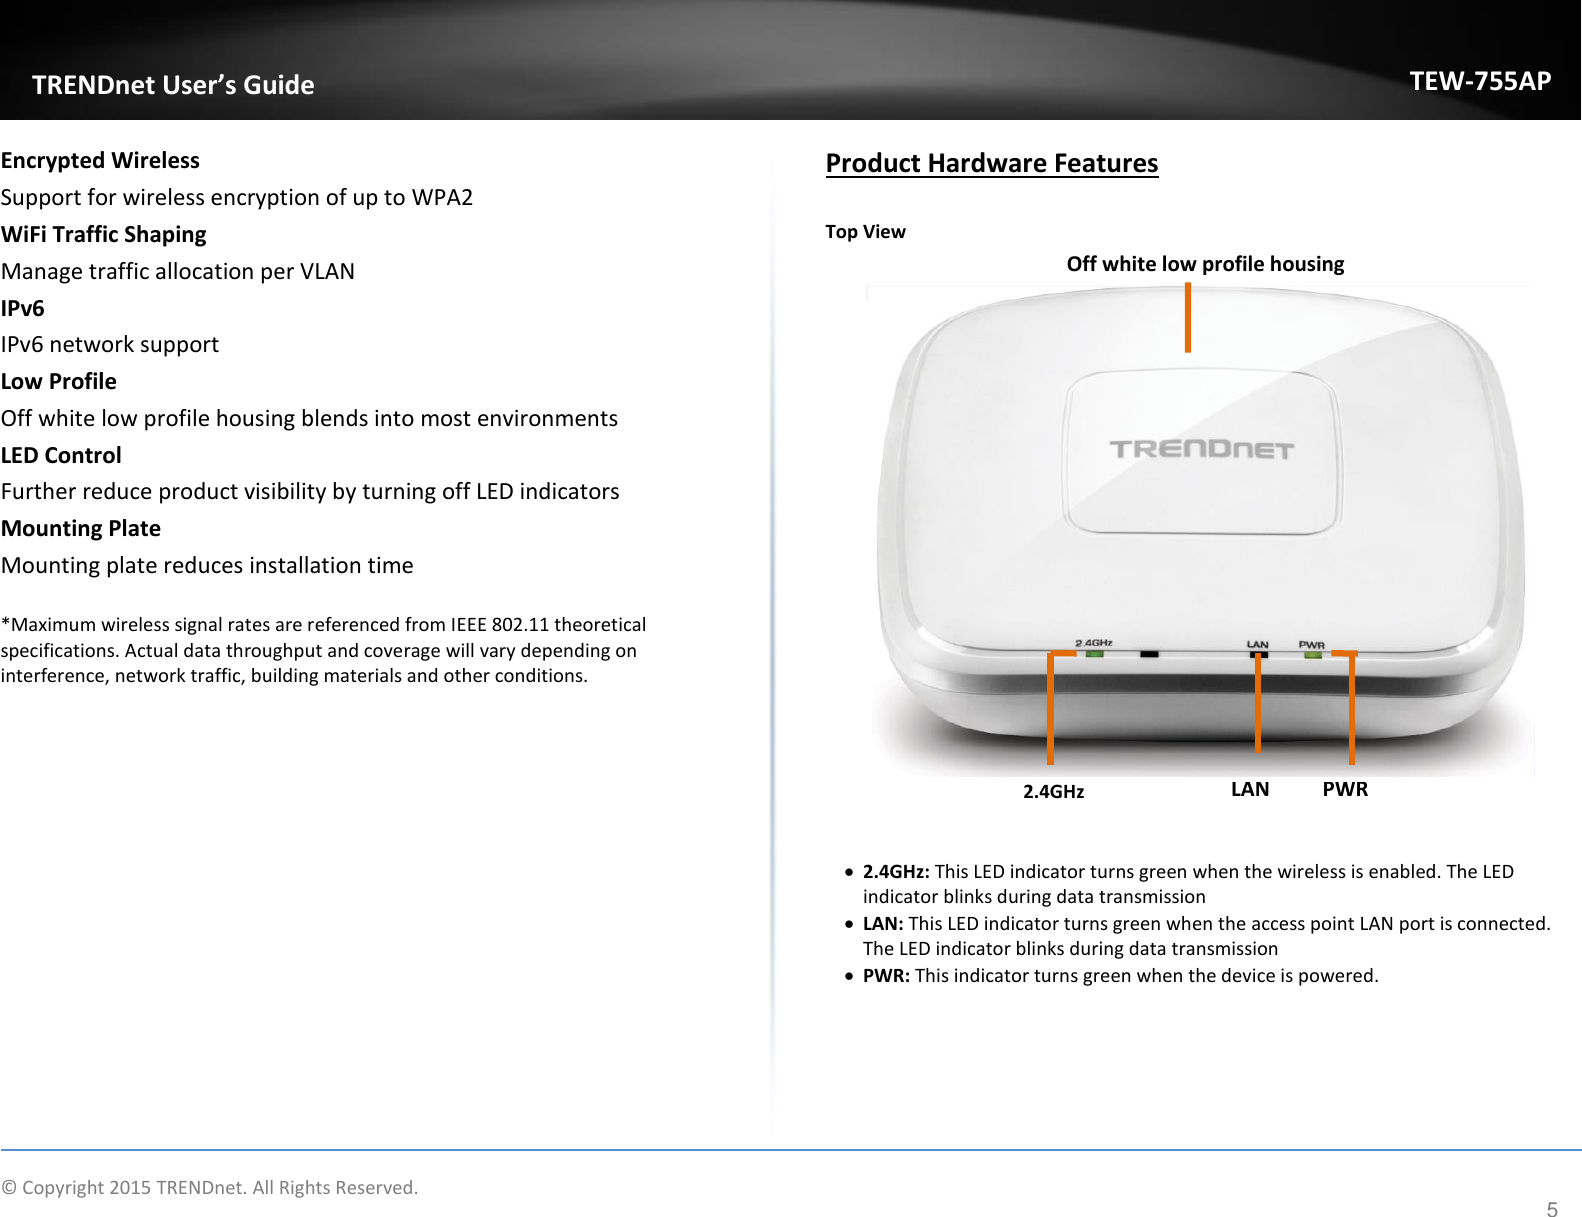             © Copyright 2015 TRENDnet. All Rights Reserved.       TRENDet User’s Guide TEW-755AP 5 2.4GHz LAN PWR Encrypted Wireless  Support for wireless encryption of up to WPA2 WiFi Traffic Shaping Manage traffic allocation per VLAN  IPv6 IPv6 network support Low Profile Off white low profile housing blends into most environments LED Control Further reduce product visibility by turning off LED indicators  Mounting Plate  Mounting plate reduces installation time    *Maximum wireless signal rates are referenced from IEEE 802.11 theoretical specifications. Actual data throughput and coverage will vary depending on interference, network traffic, building materials and other conditions.              Product Hardware Features  Top View         2.4GHz: This LED indicator turns green when the wireless is enabled. The LED indicator blinks during data transmission  LAN: This LED indicator turns green when the access point LAN port is connected. The LED indicator blinks during data transmission   PWR: This indicator turns green when the device is powered.       Off white low profile housing 